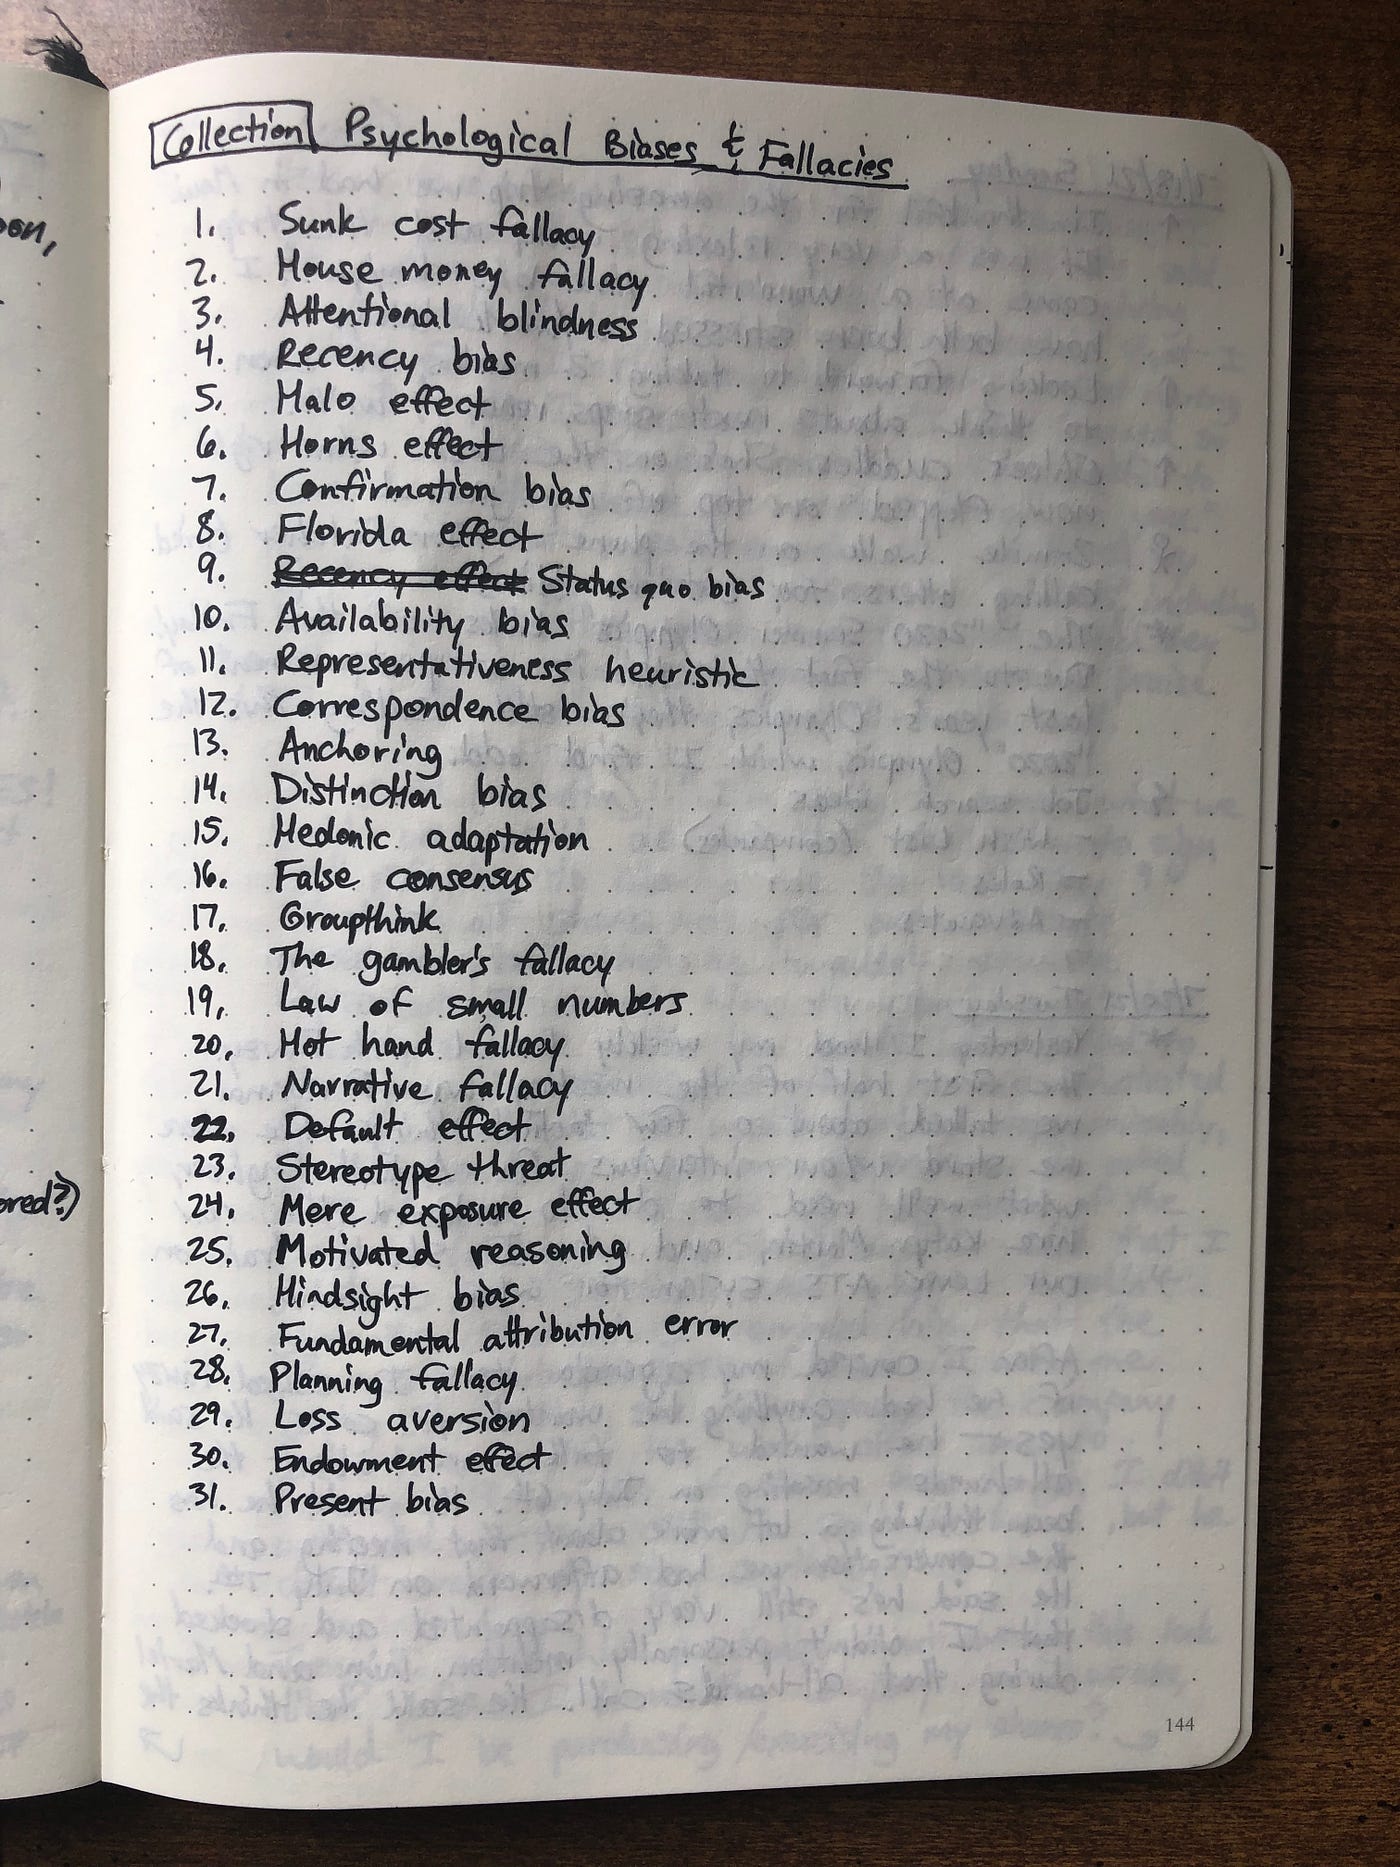 The Ultimate Bullet Journal Glossary That Every Bujo Newbie Needs -  Planning Mindfully